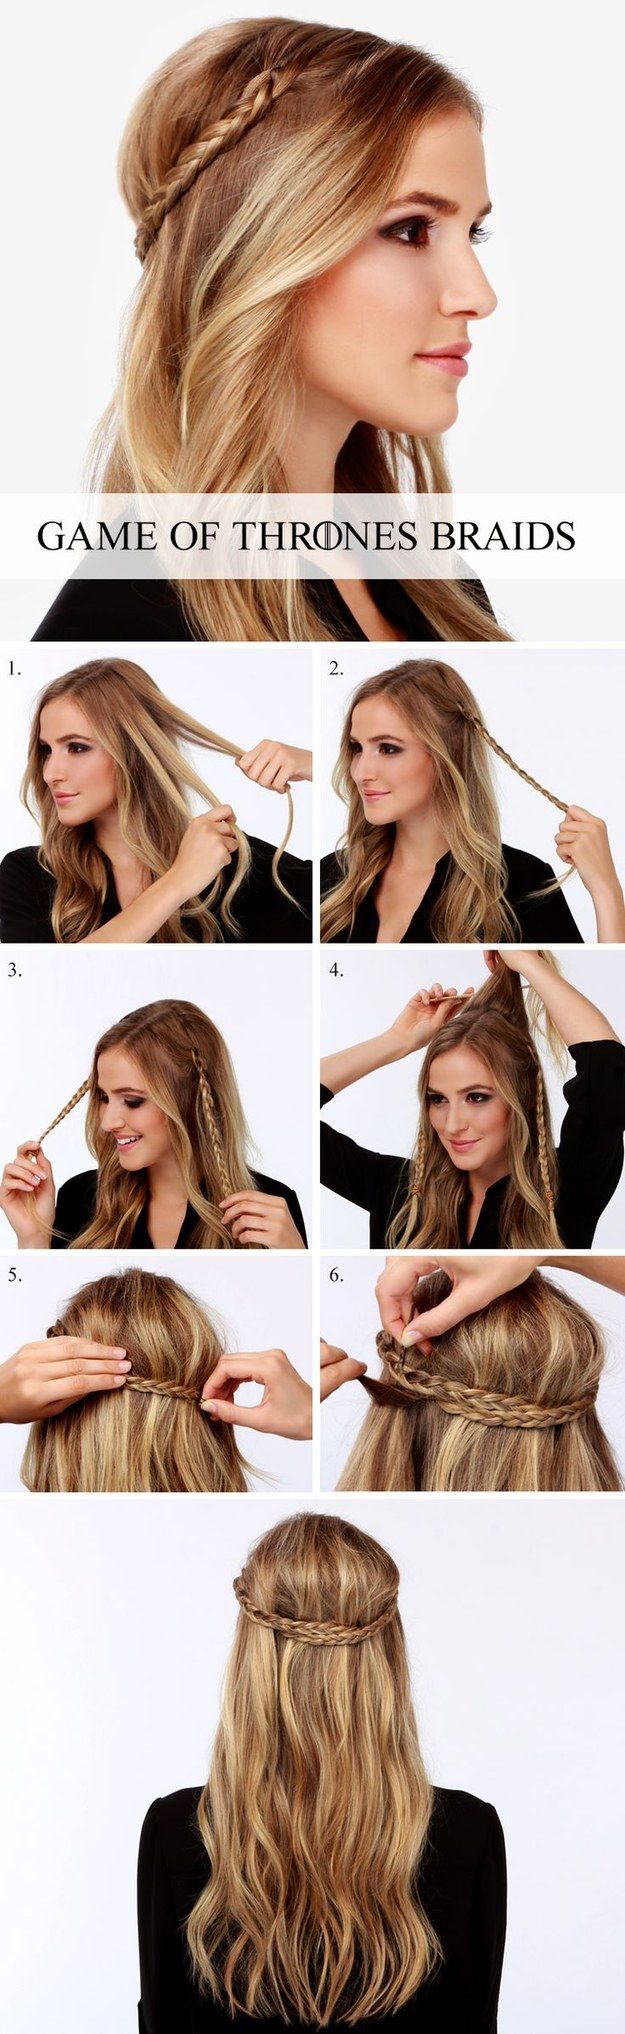 Game of Thrones Braid Hairstyle Tutorial